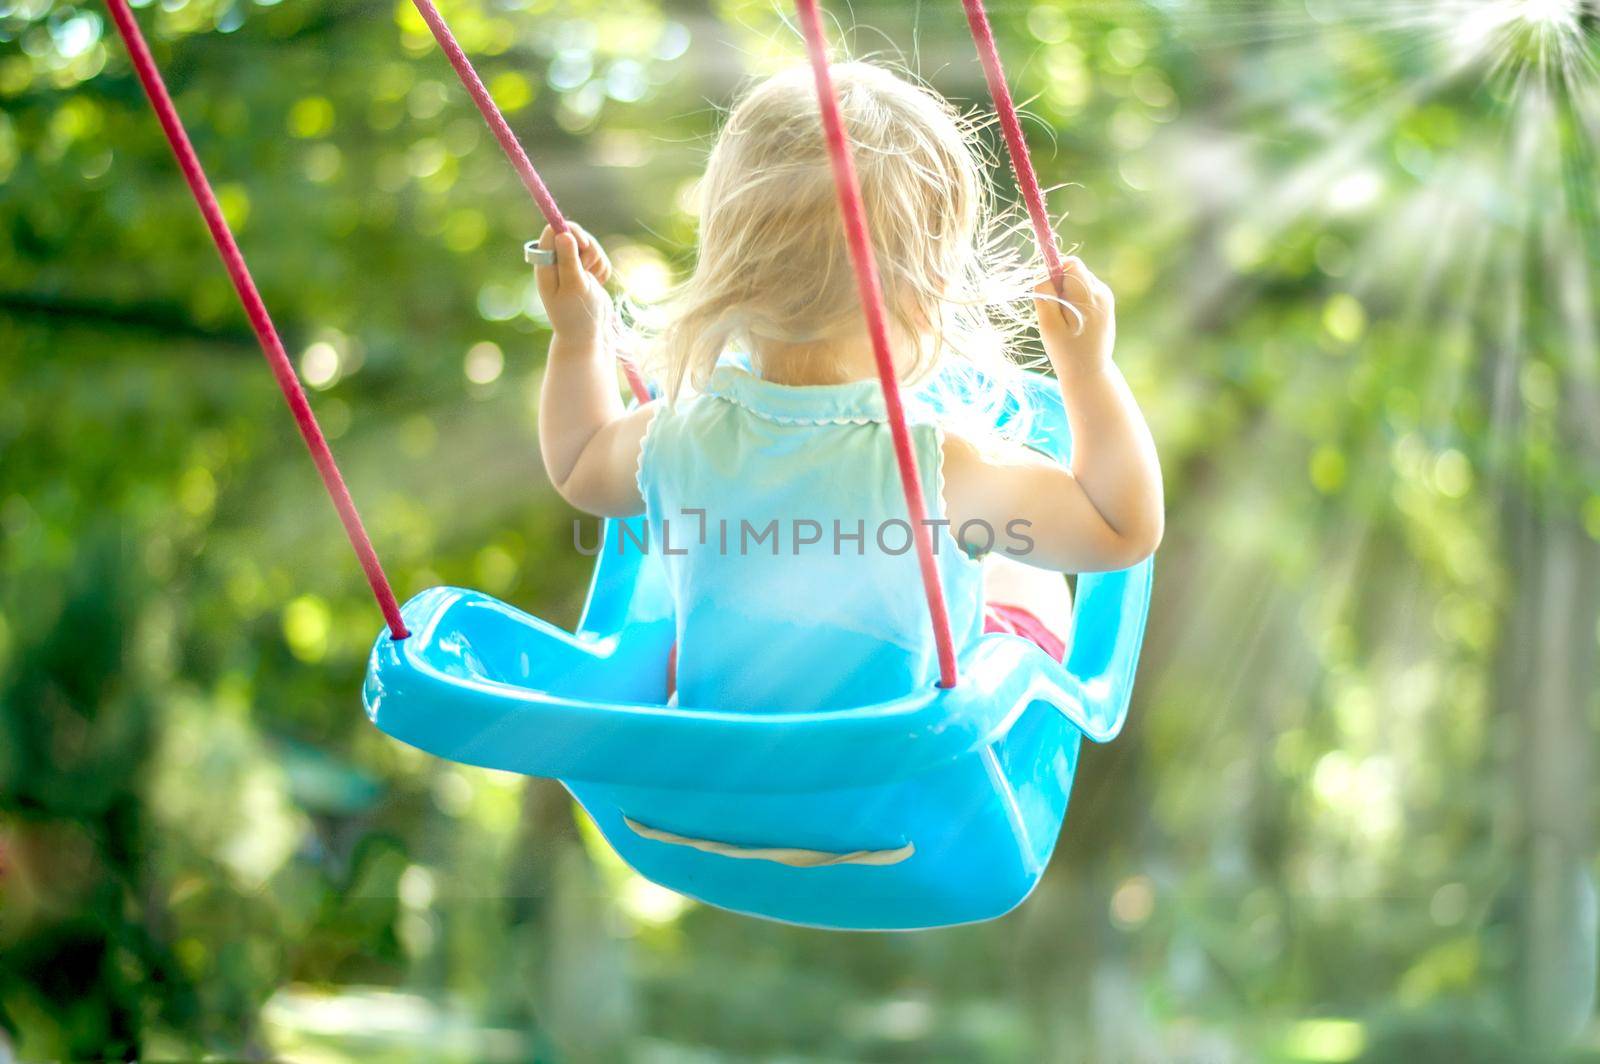 toddler girl on a swing in the park by maramorosz